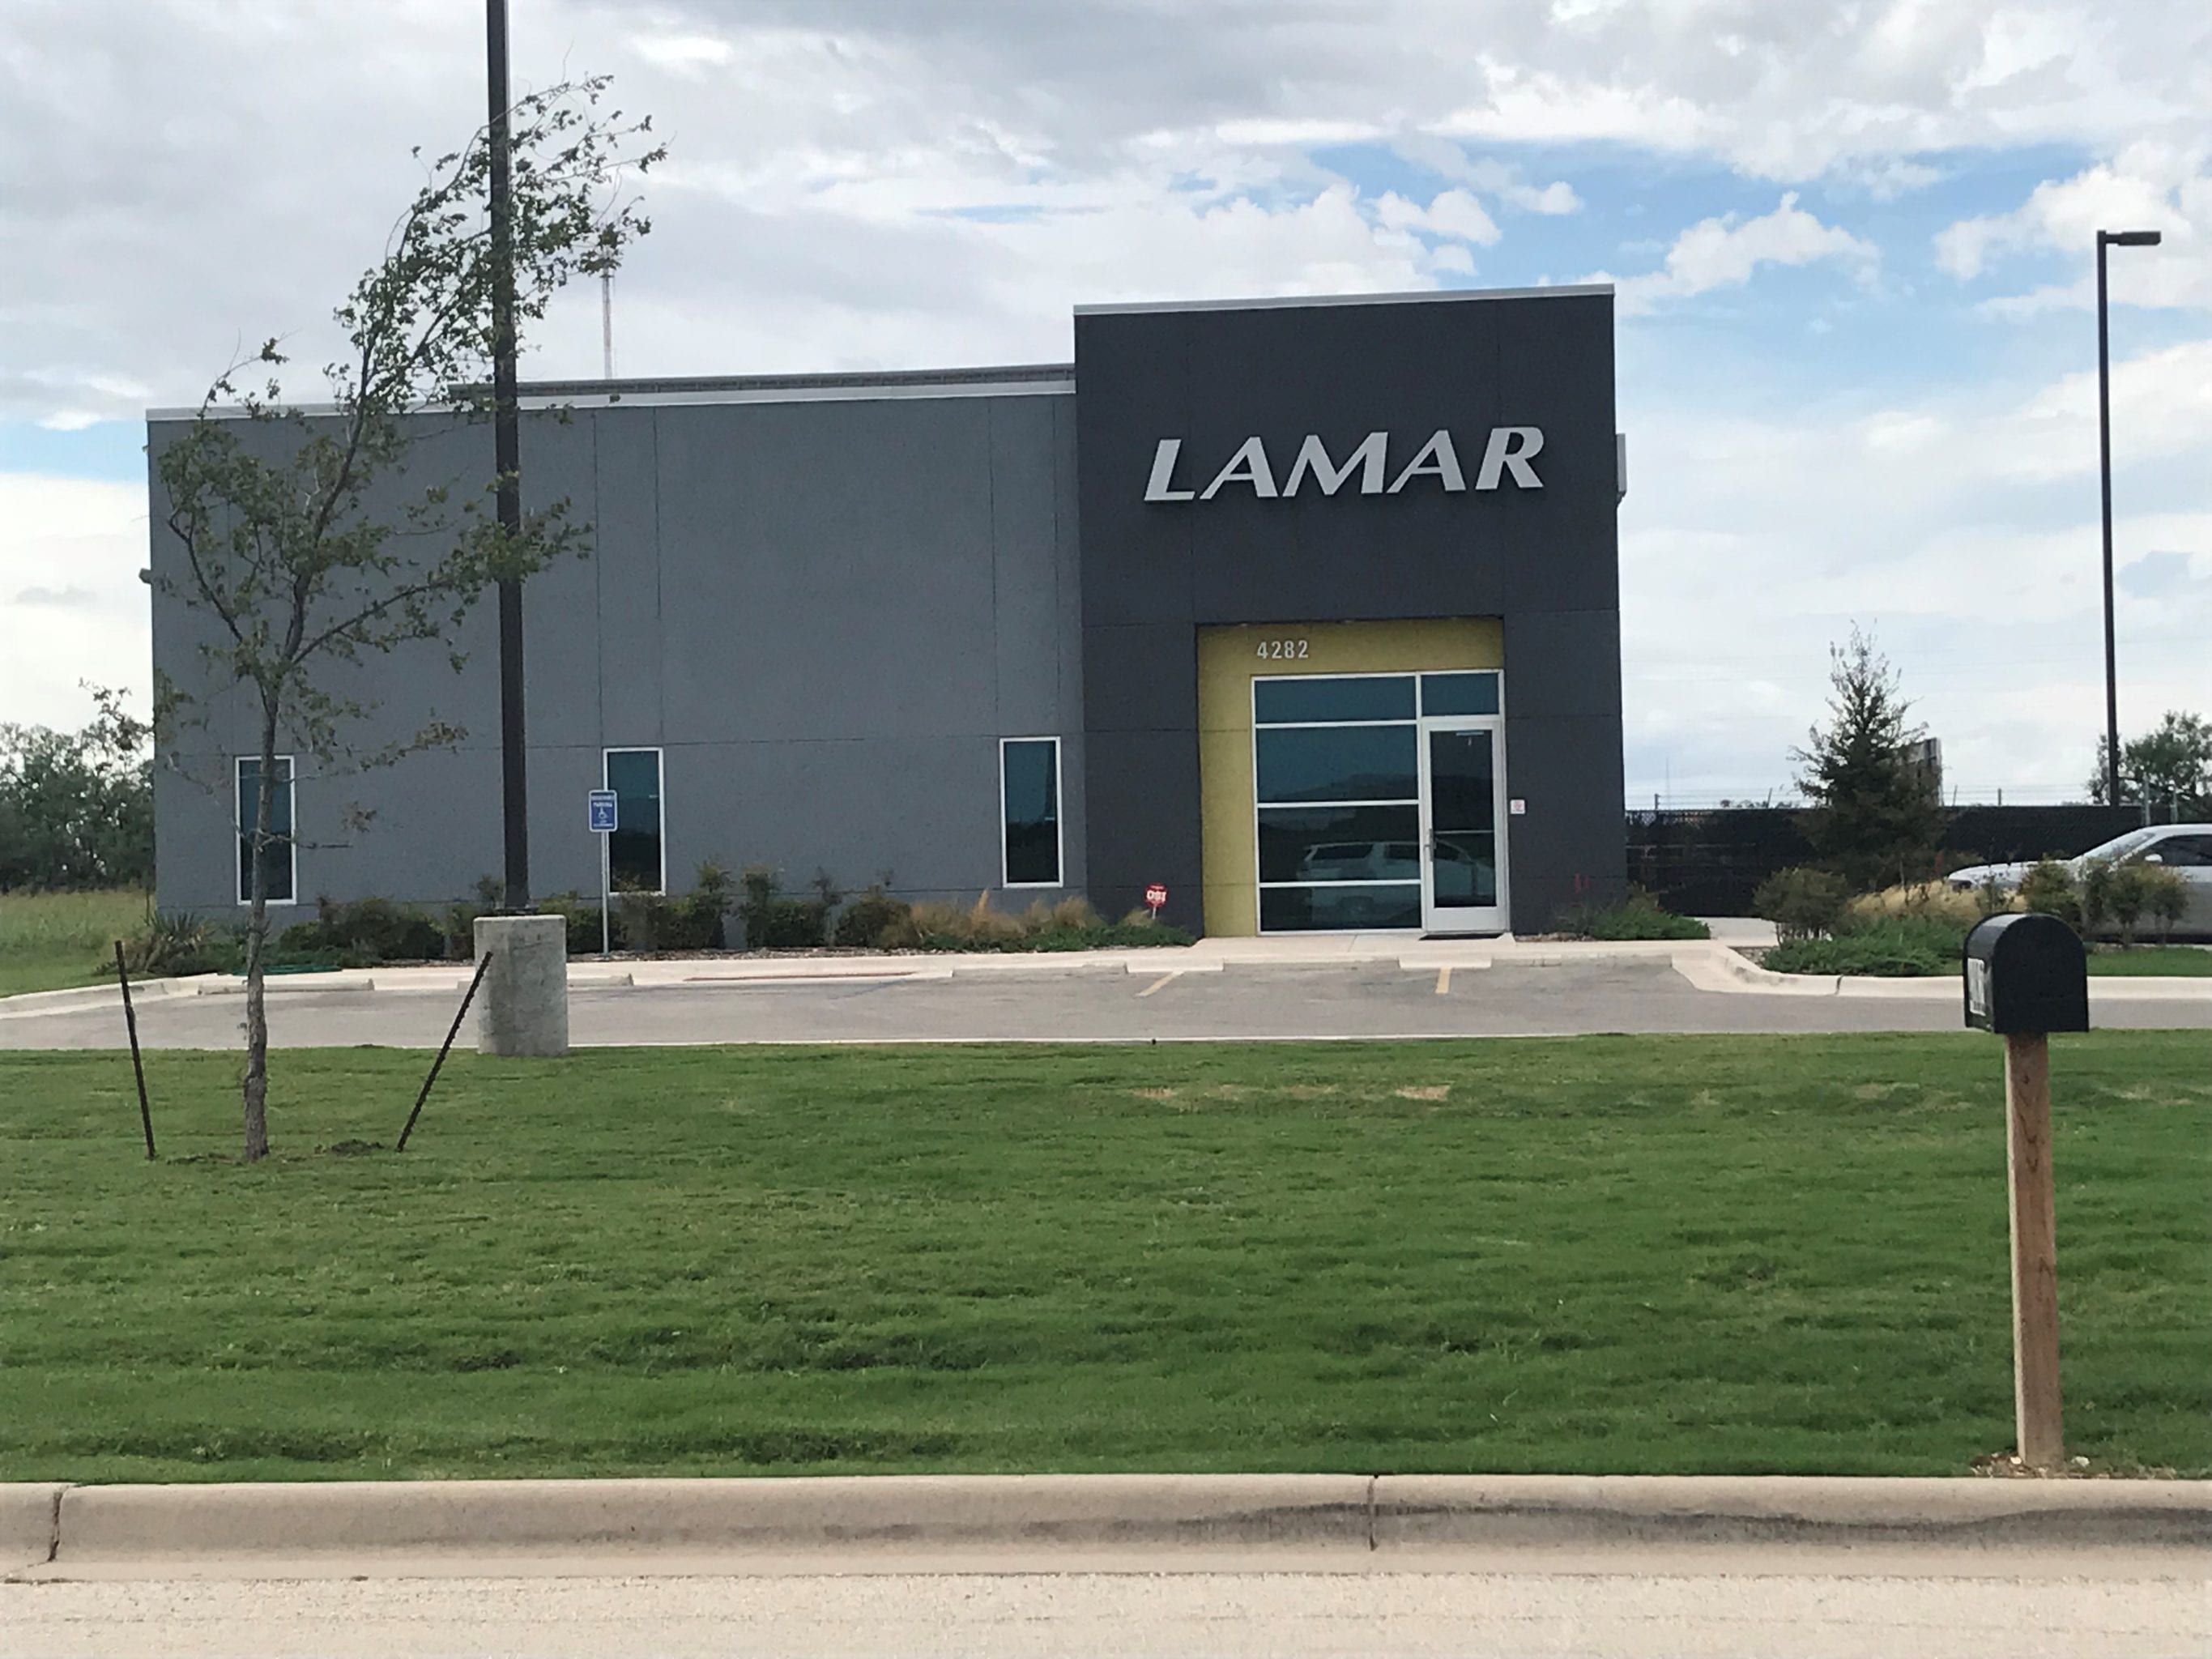 Lamar Advertising built by RHS Contraction Services in Abilene, Texas